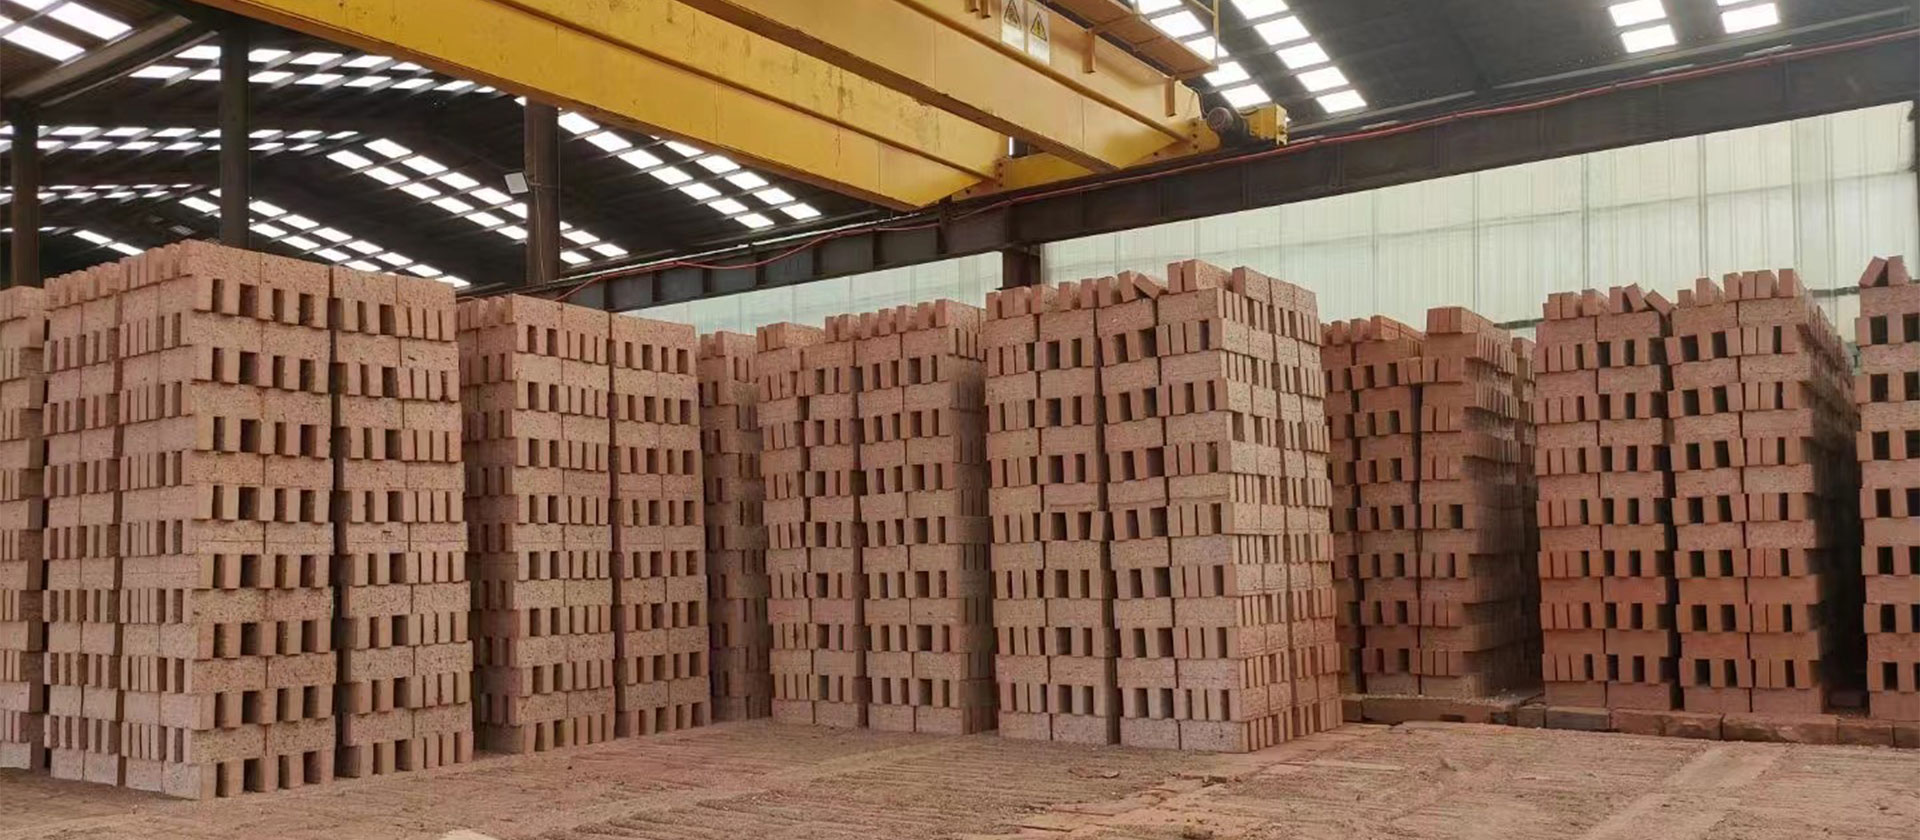 How to make red bricks from clay in china?